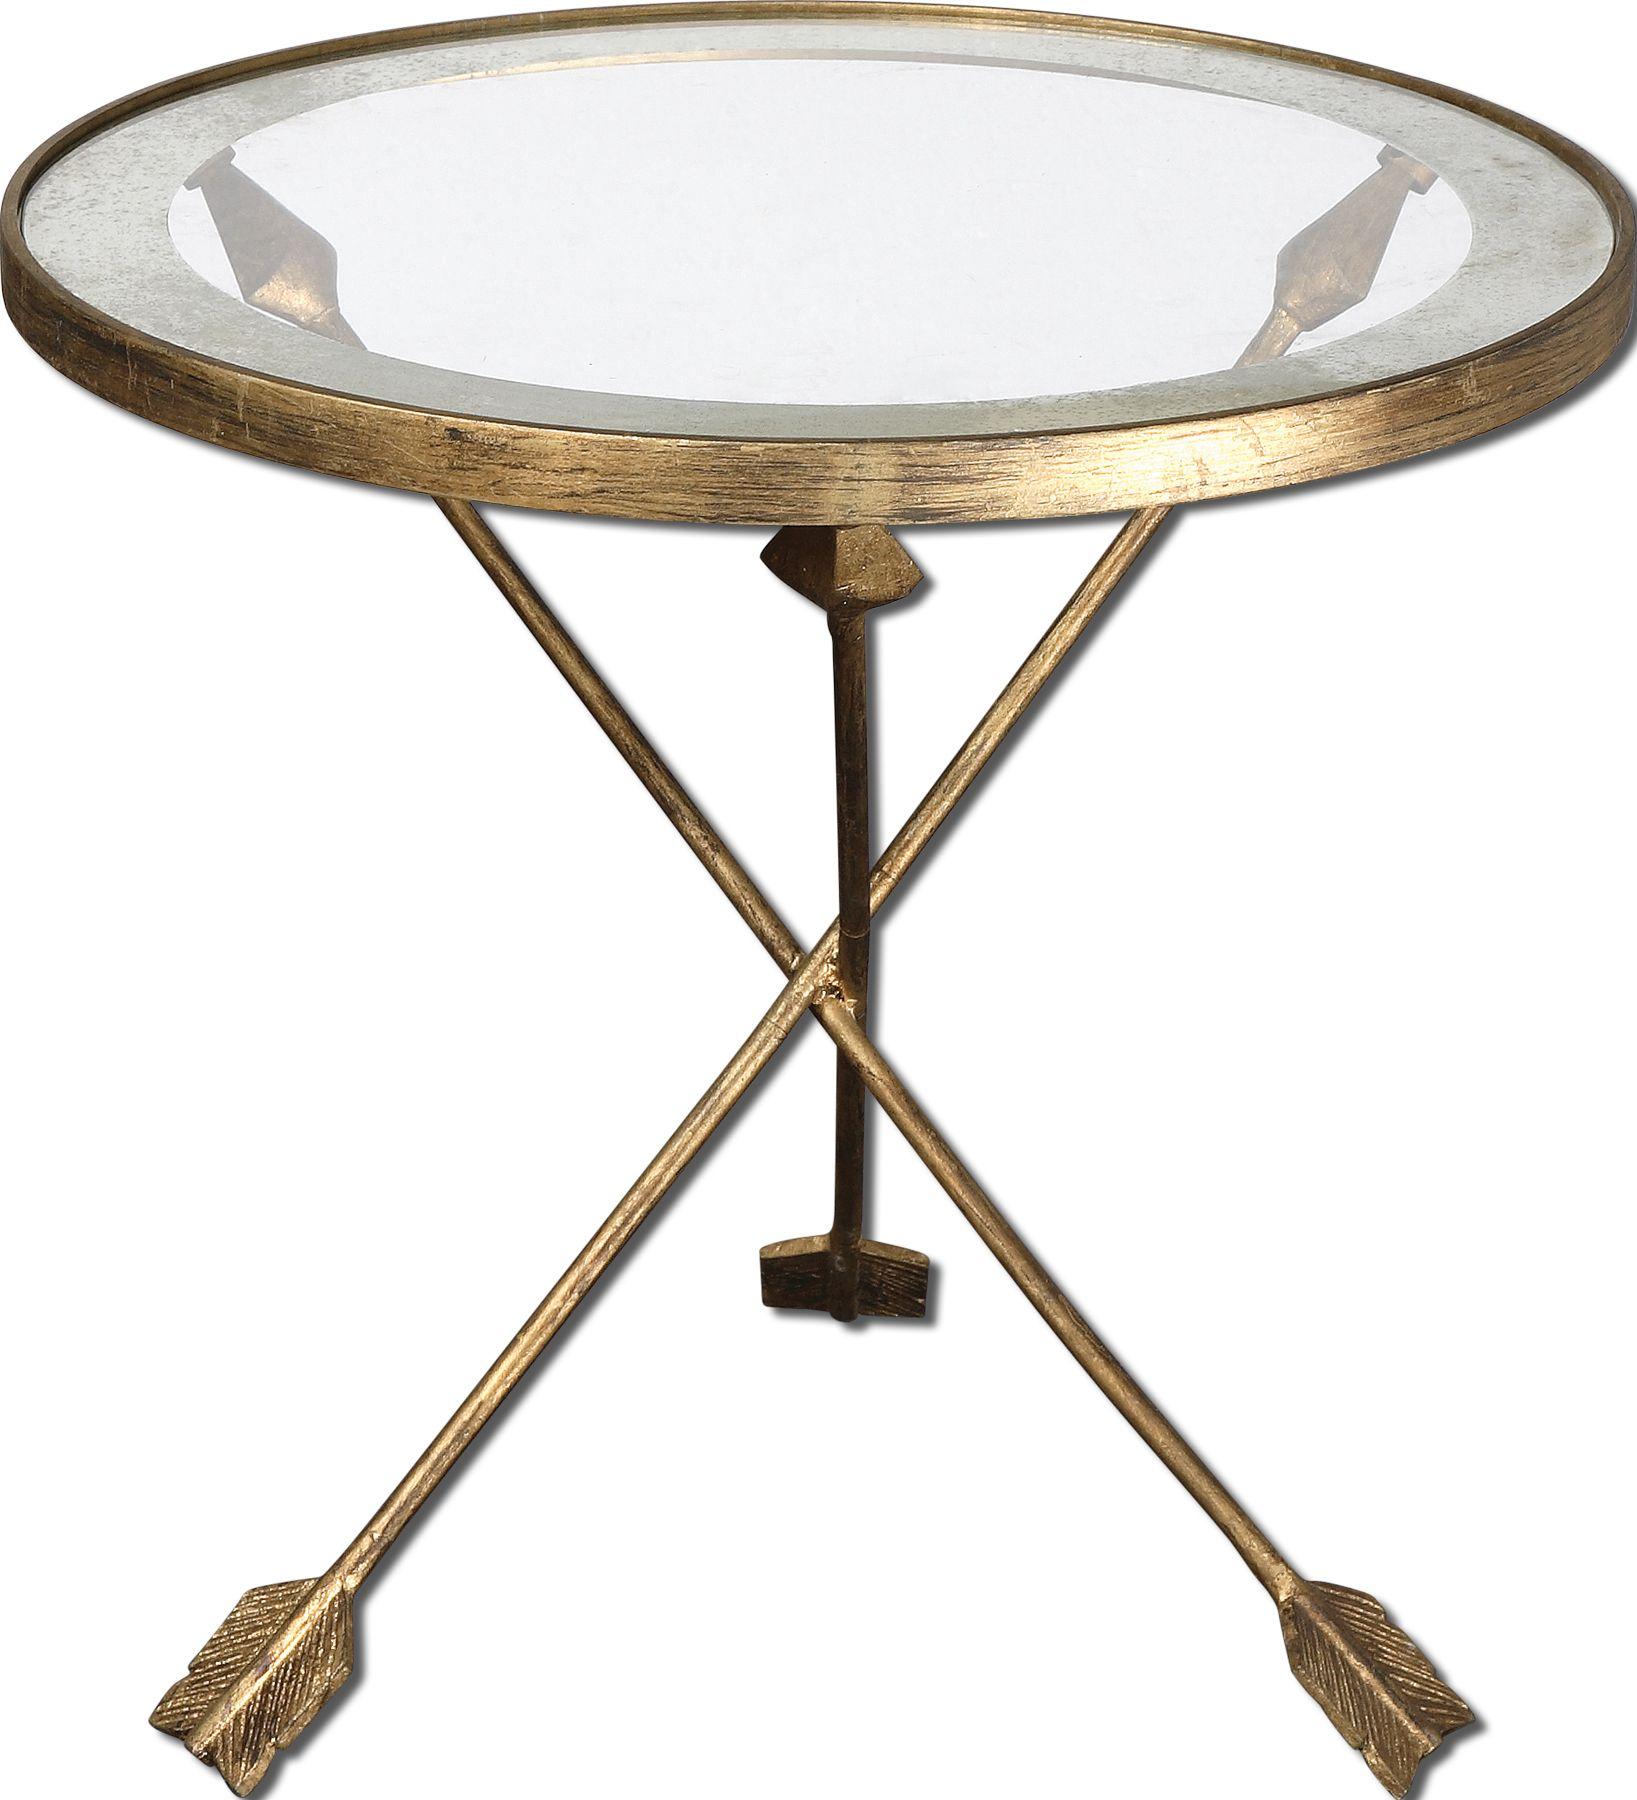 uttermost accent furniture occasional tables aero products color round top table spencer espresso nightstand old wooden jcpenney couches plexiglass navy side metal tray coffee